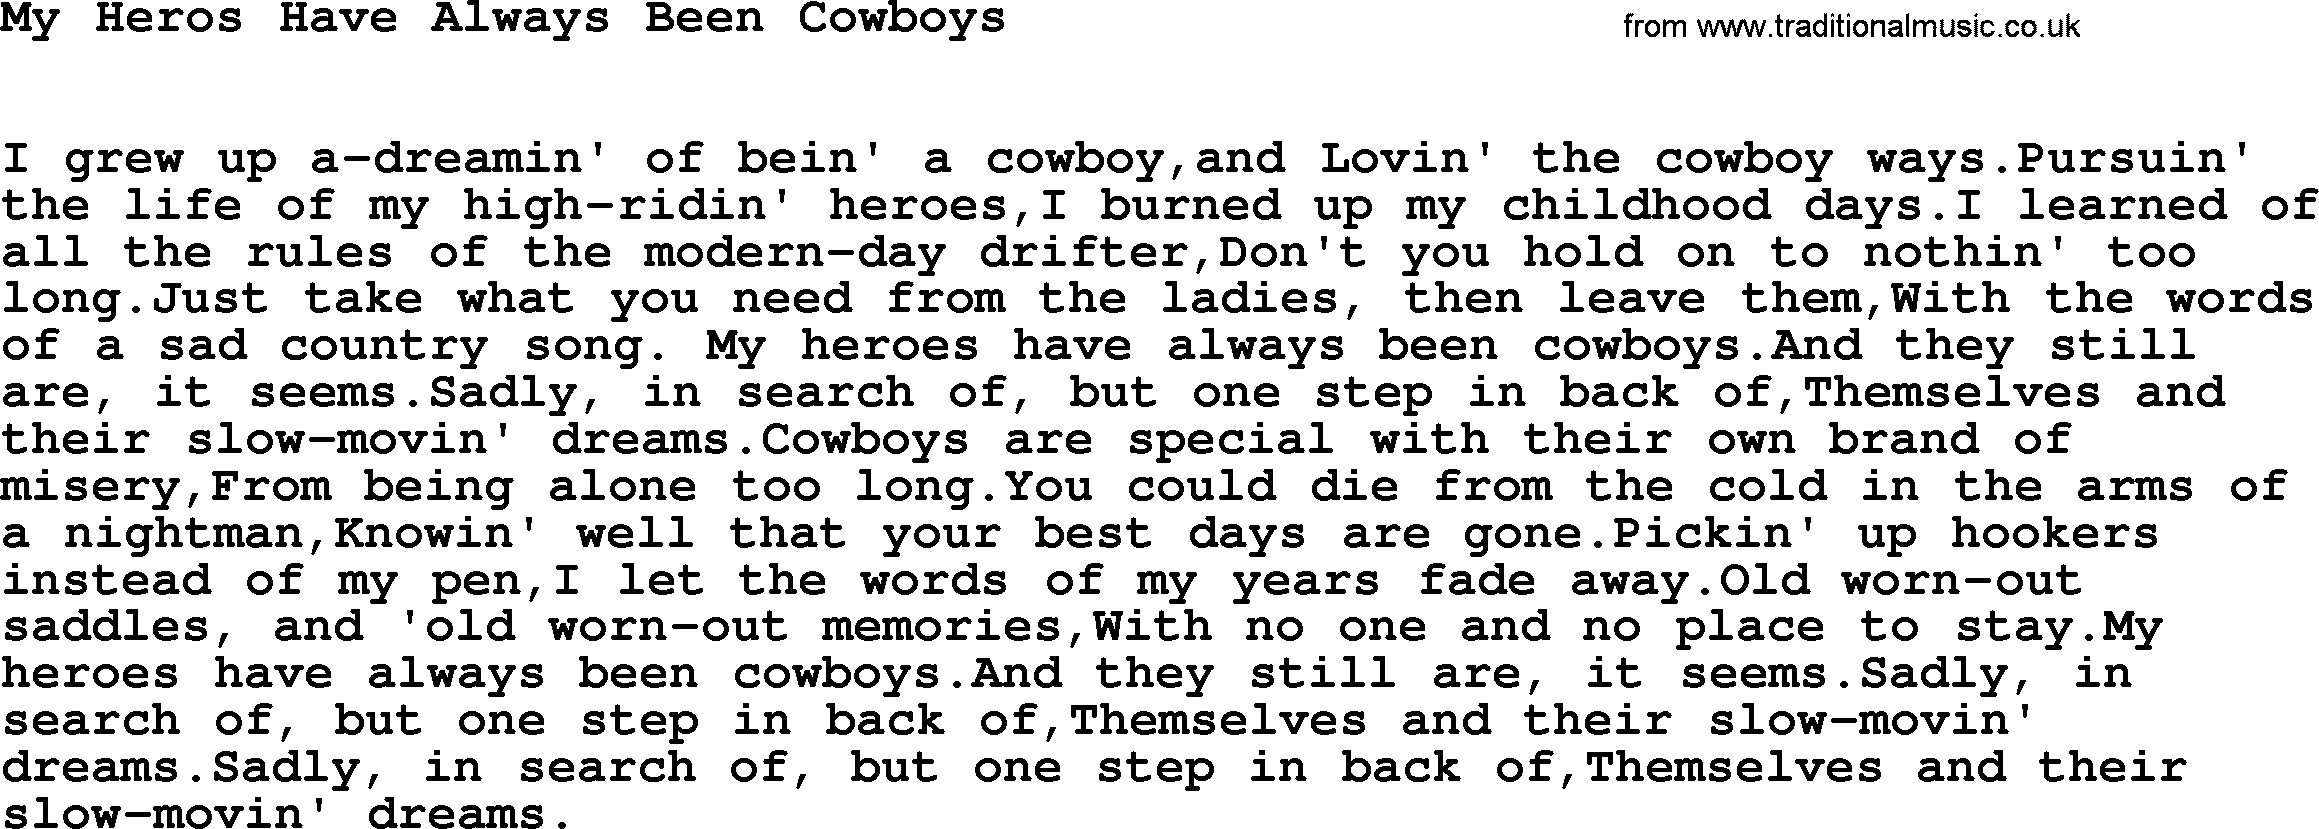 Willie Nelson song: My Heros Have Always Been Cowboys lyrics